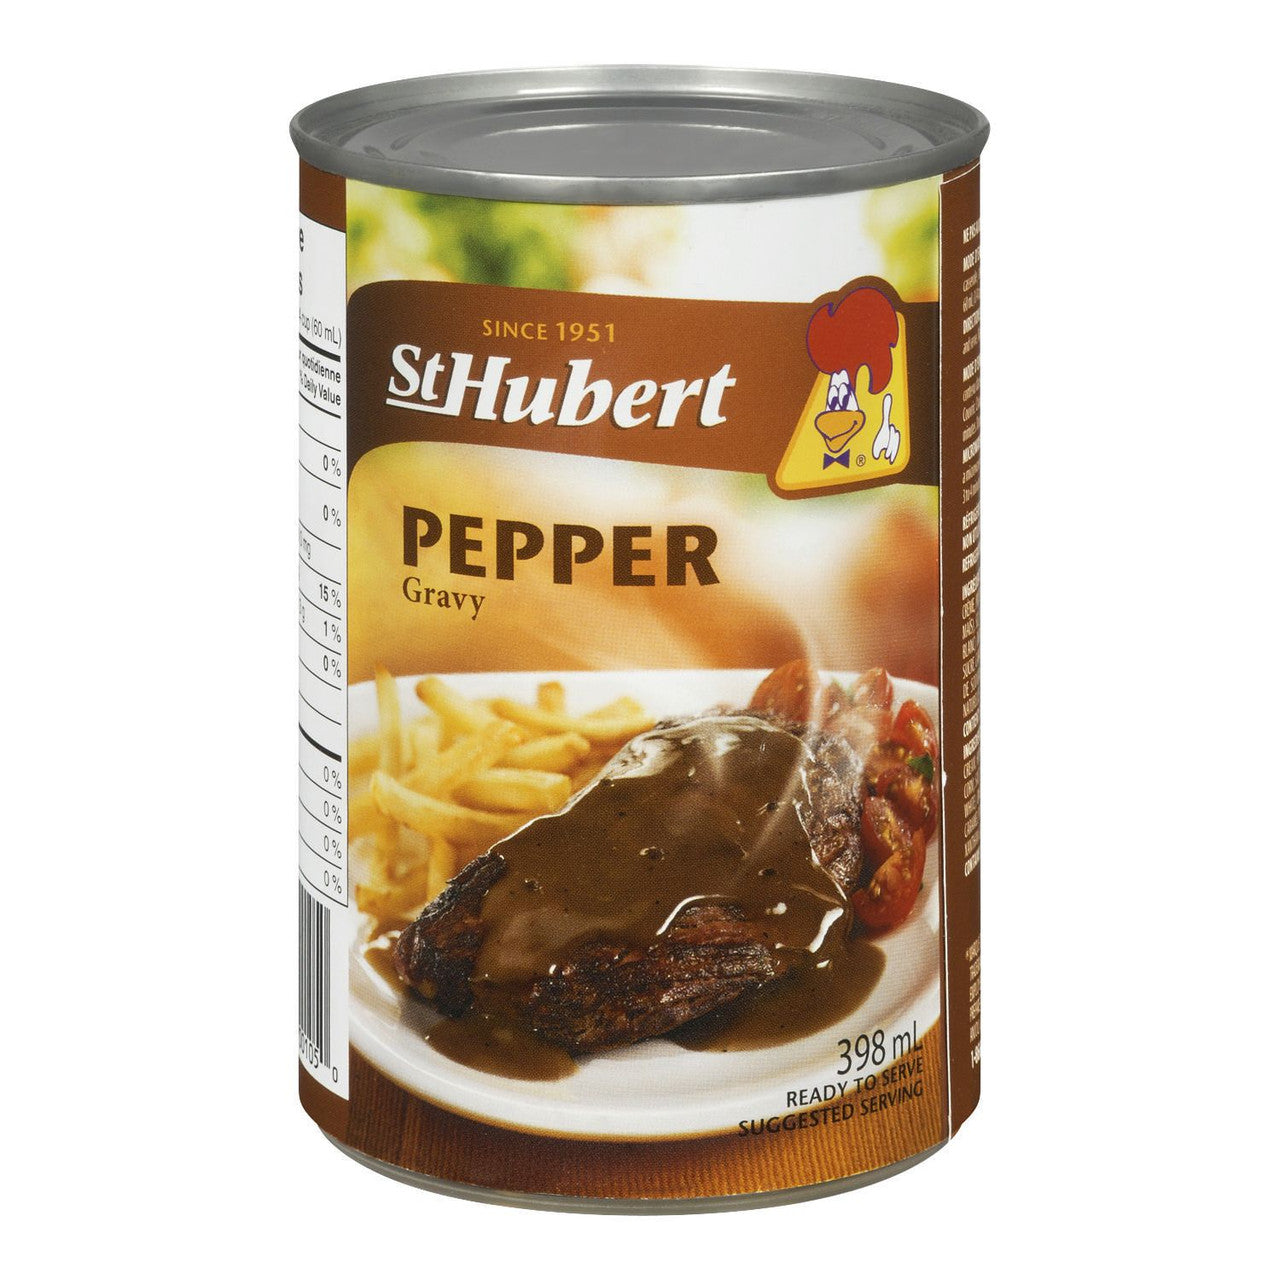 St. Hubert Pepper Gravy 398ml/13.5oz Can, (Imported from Canada)